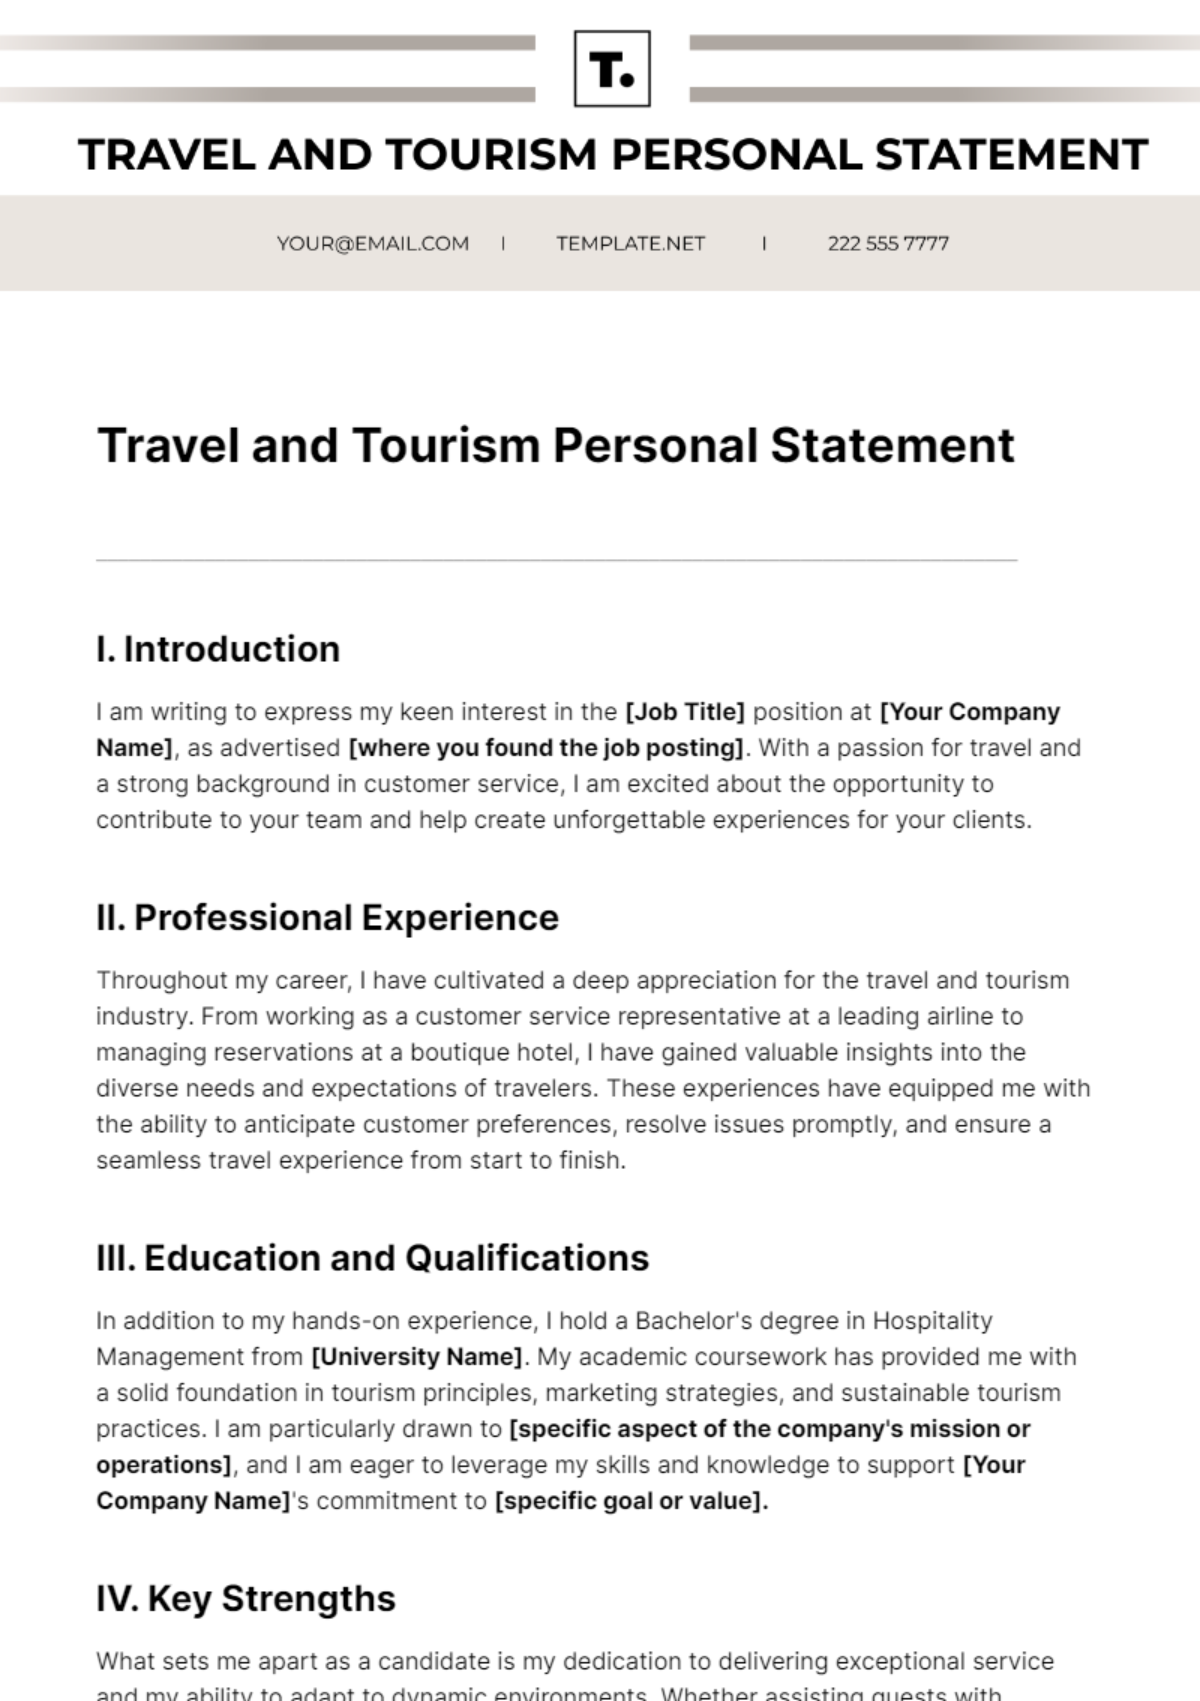 Travel and Tourism Personal Statement Template